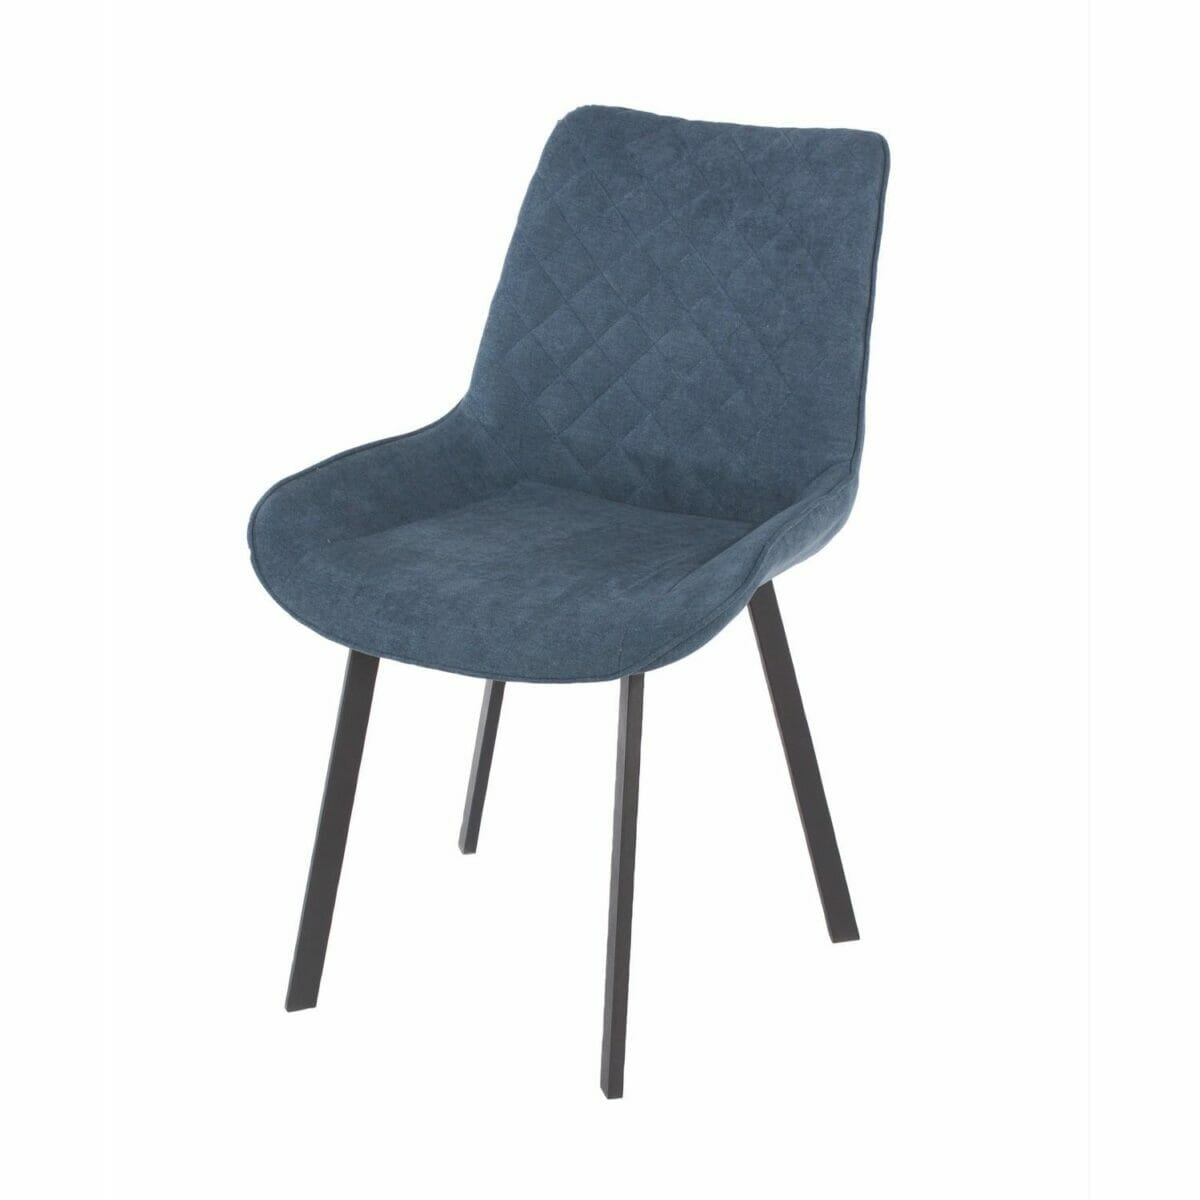 Aspen Core Blue Diamond Stitch Fabric Upholstered Dining Chairs With Black Metal Legs (Pair)